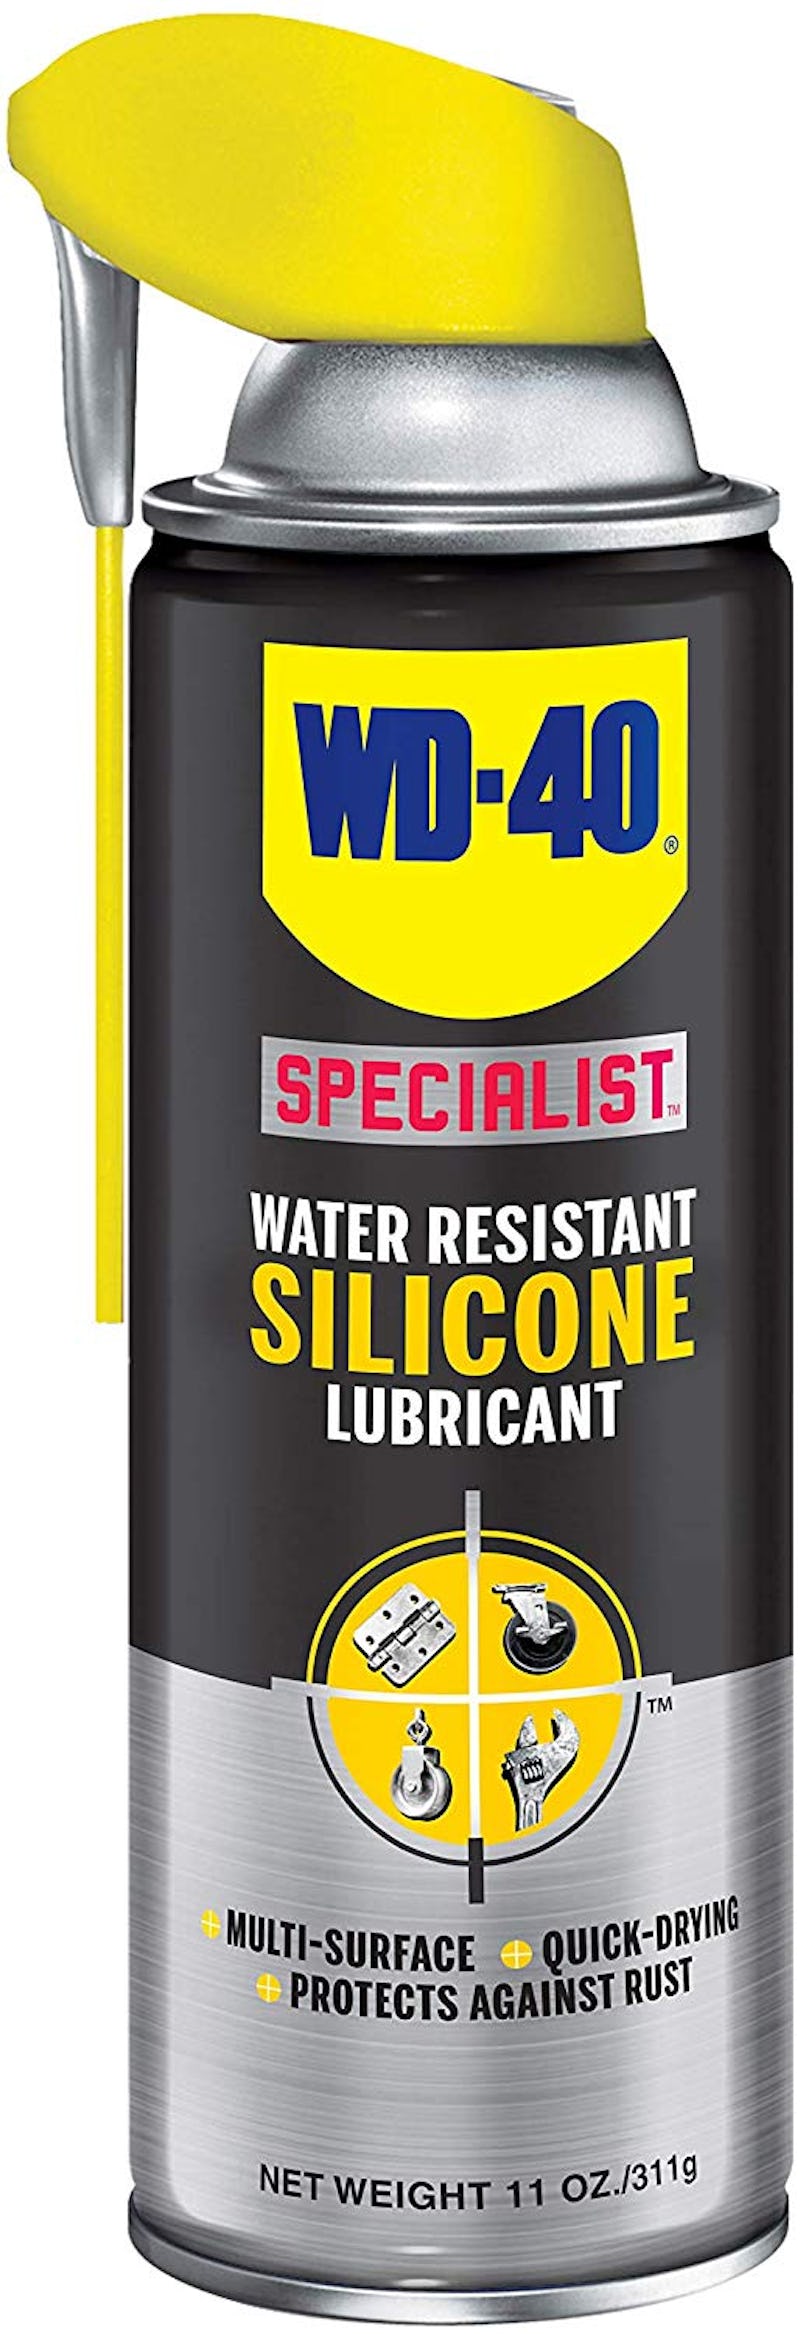 88b1337e Fa9b 4efe 8a00 92be37a70221 Best Lubricant For Squeaky Office Chairs ?w=400&h=1167&fit=crop&crop=faces&auto=format%2Ccompress&q=50&dpr=2